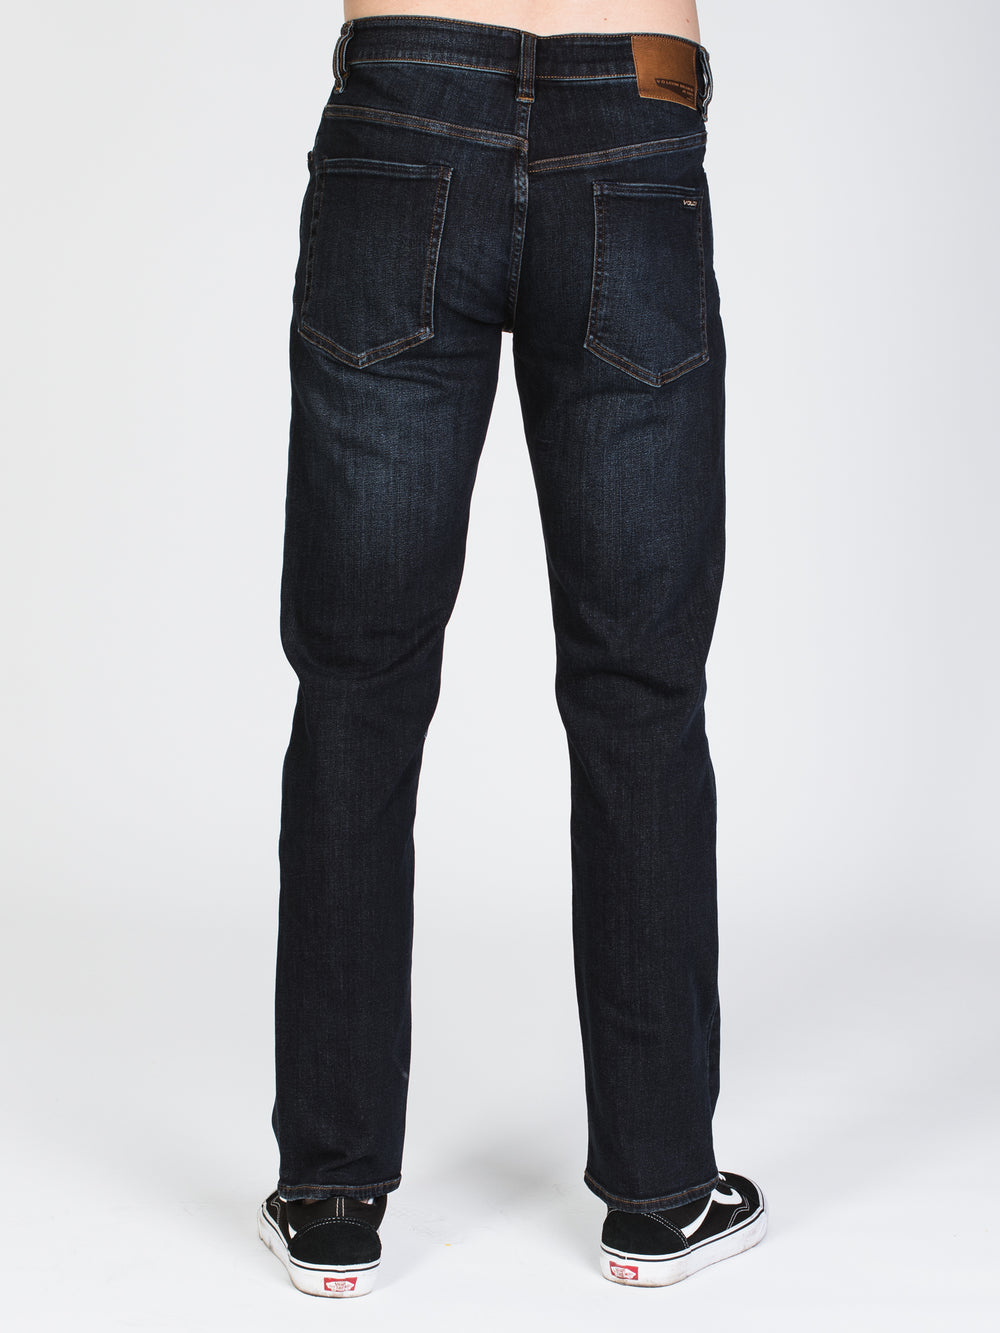 VOLCOM SOLVER JEAN 16"  - CLEARANCE